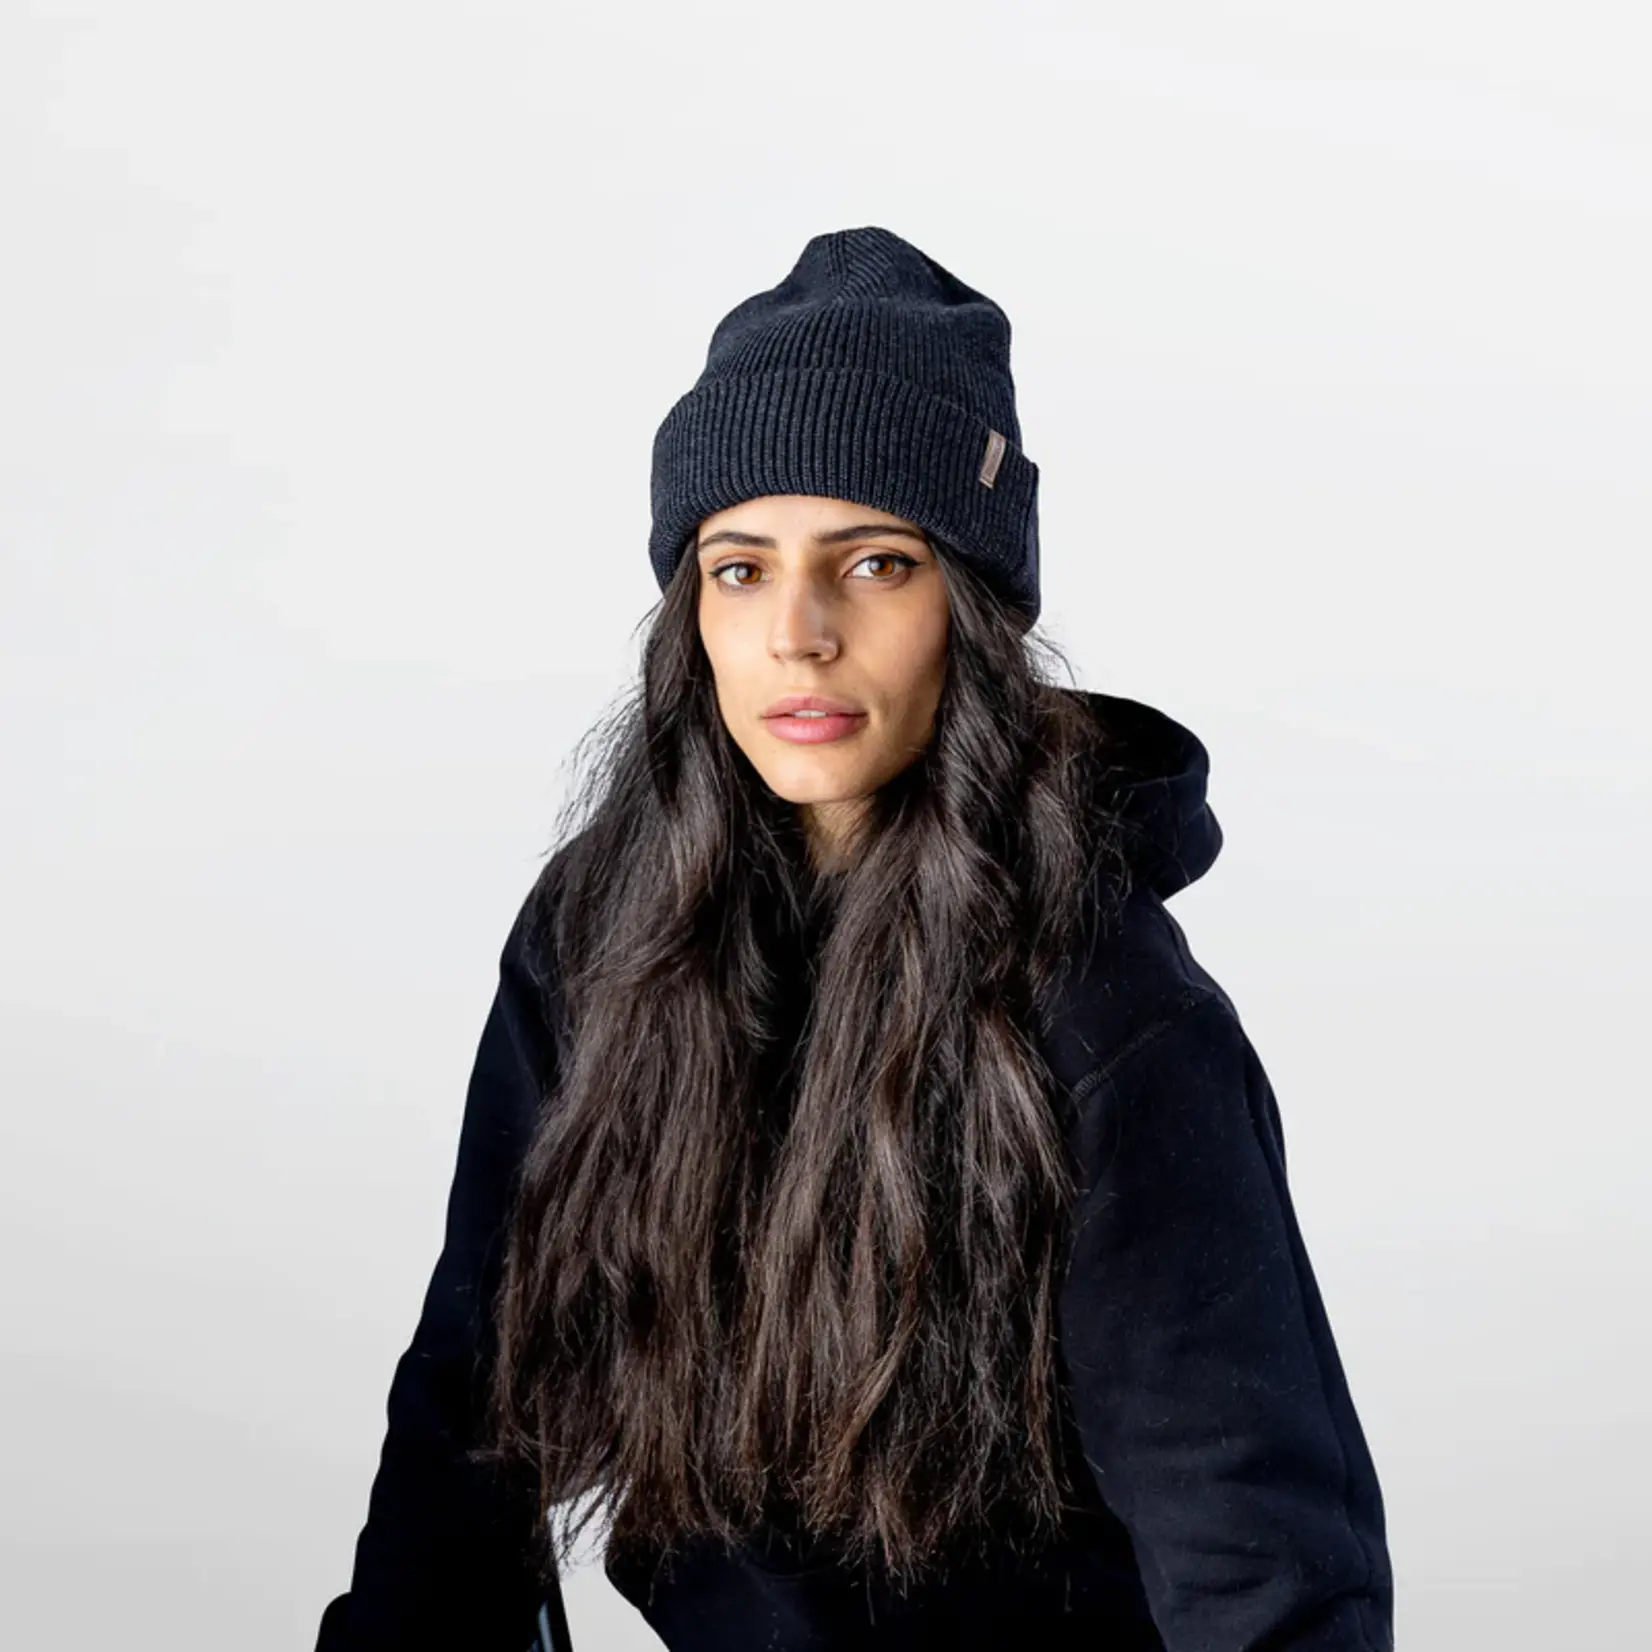 Stanfield's Stanfield's 1321 Wool Toque - One Size